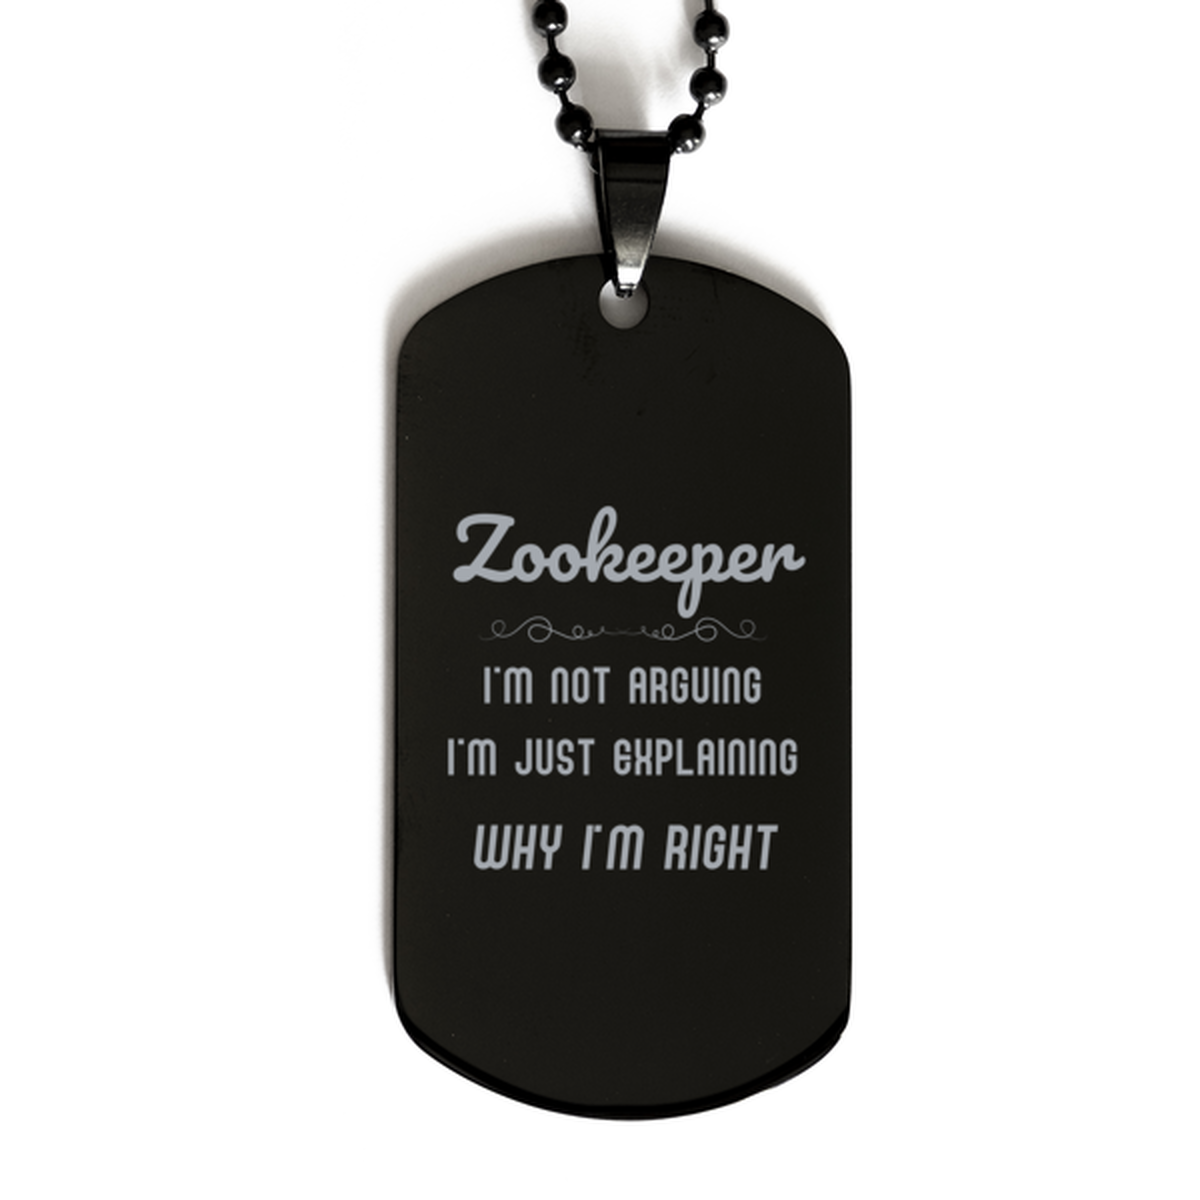 Zookeeper I'm not Arguing. I'm Just Explaining Why I'm RIGHT Black Dog Tag, Funny Saying Quote Zookeeper Gifts For Zookeeper Graduation Birthday Christmas Gifts for Men Women Coworker